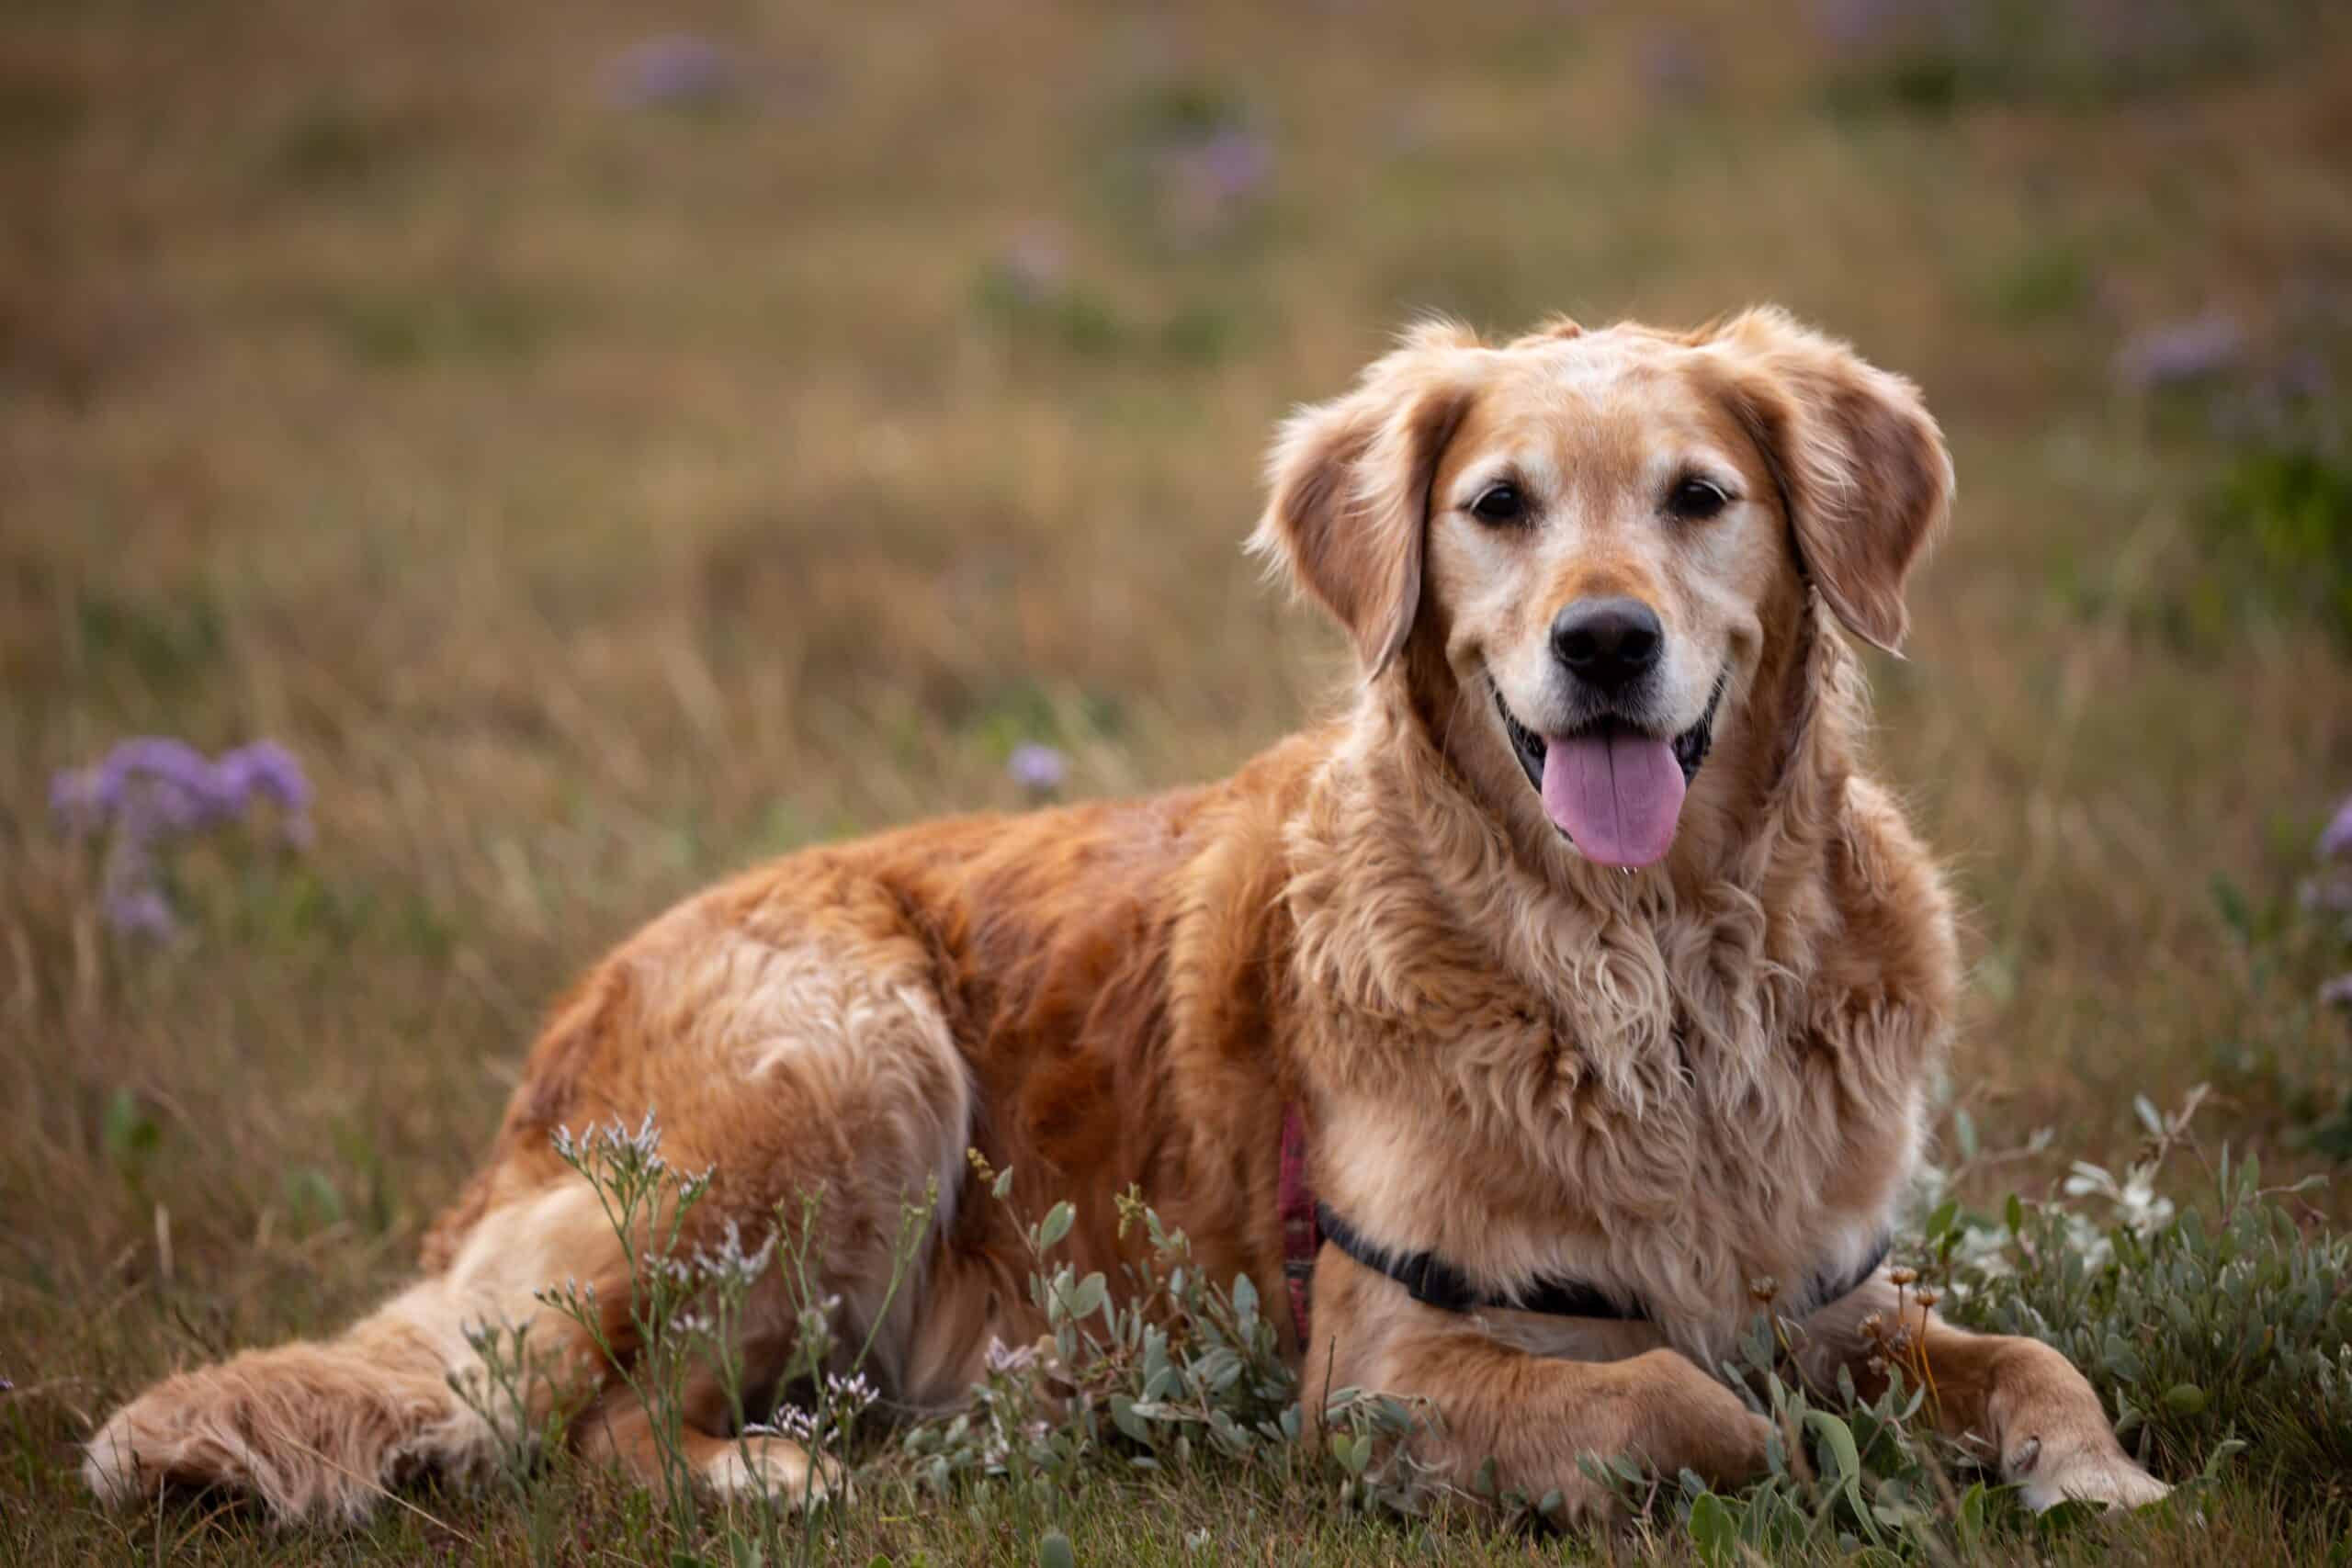 What About Calm Dogs? Which are the Calmest Dog Breeds for Your Home? (In 2020)